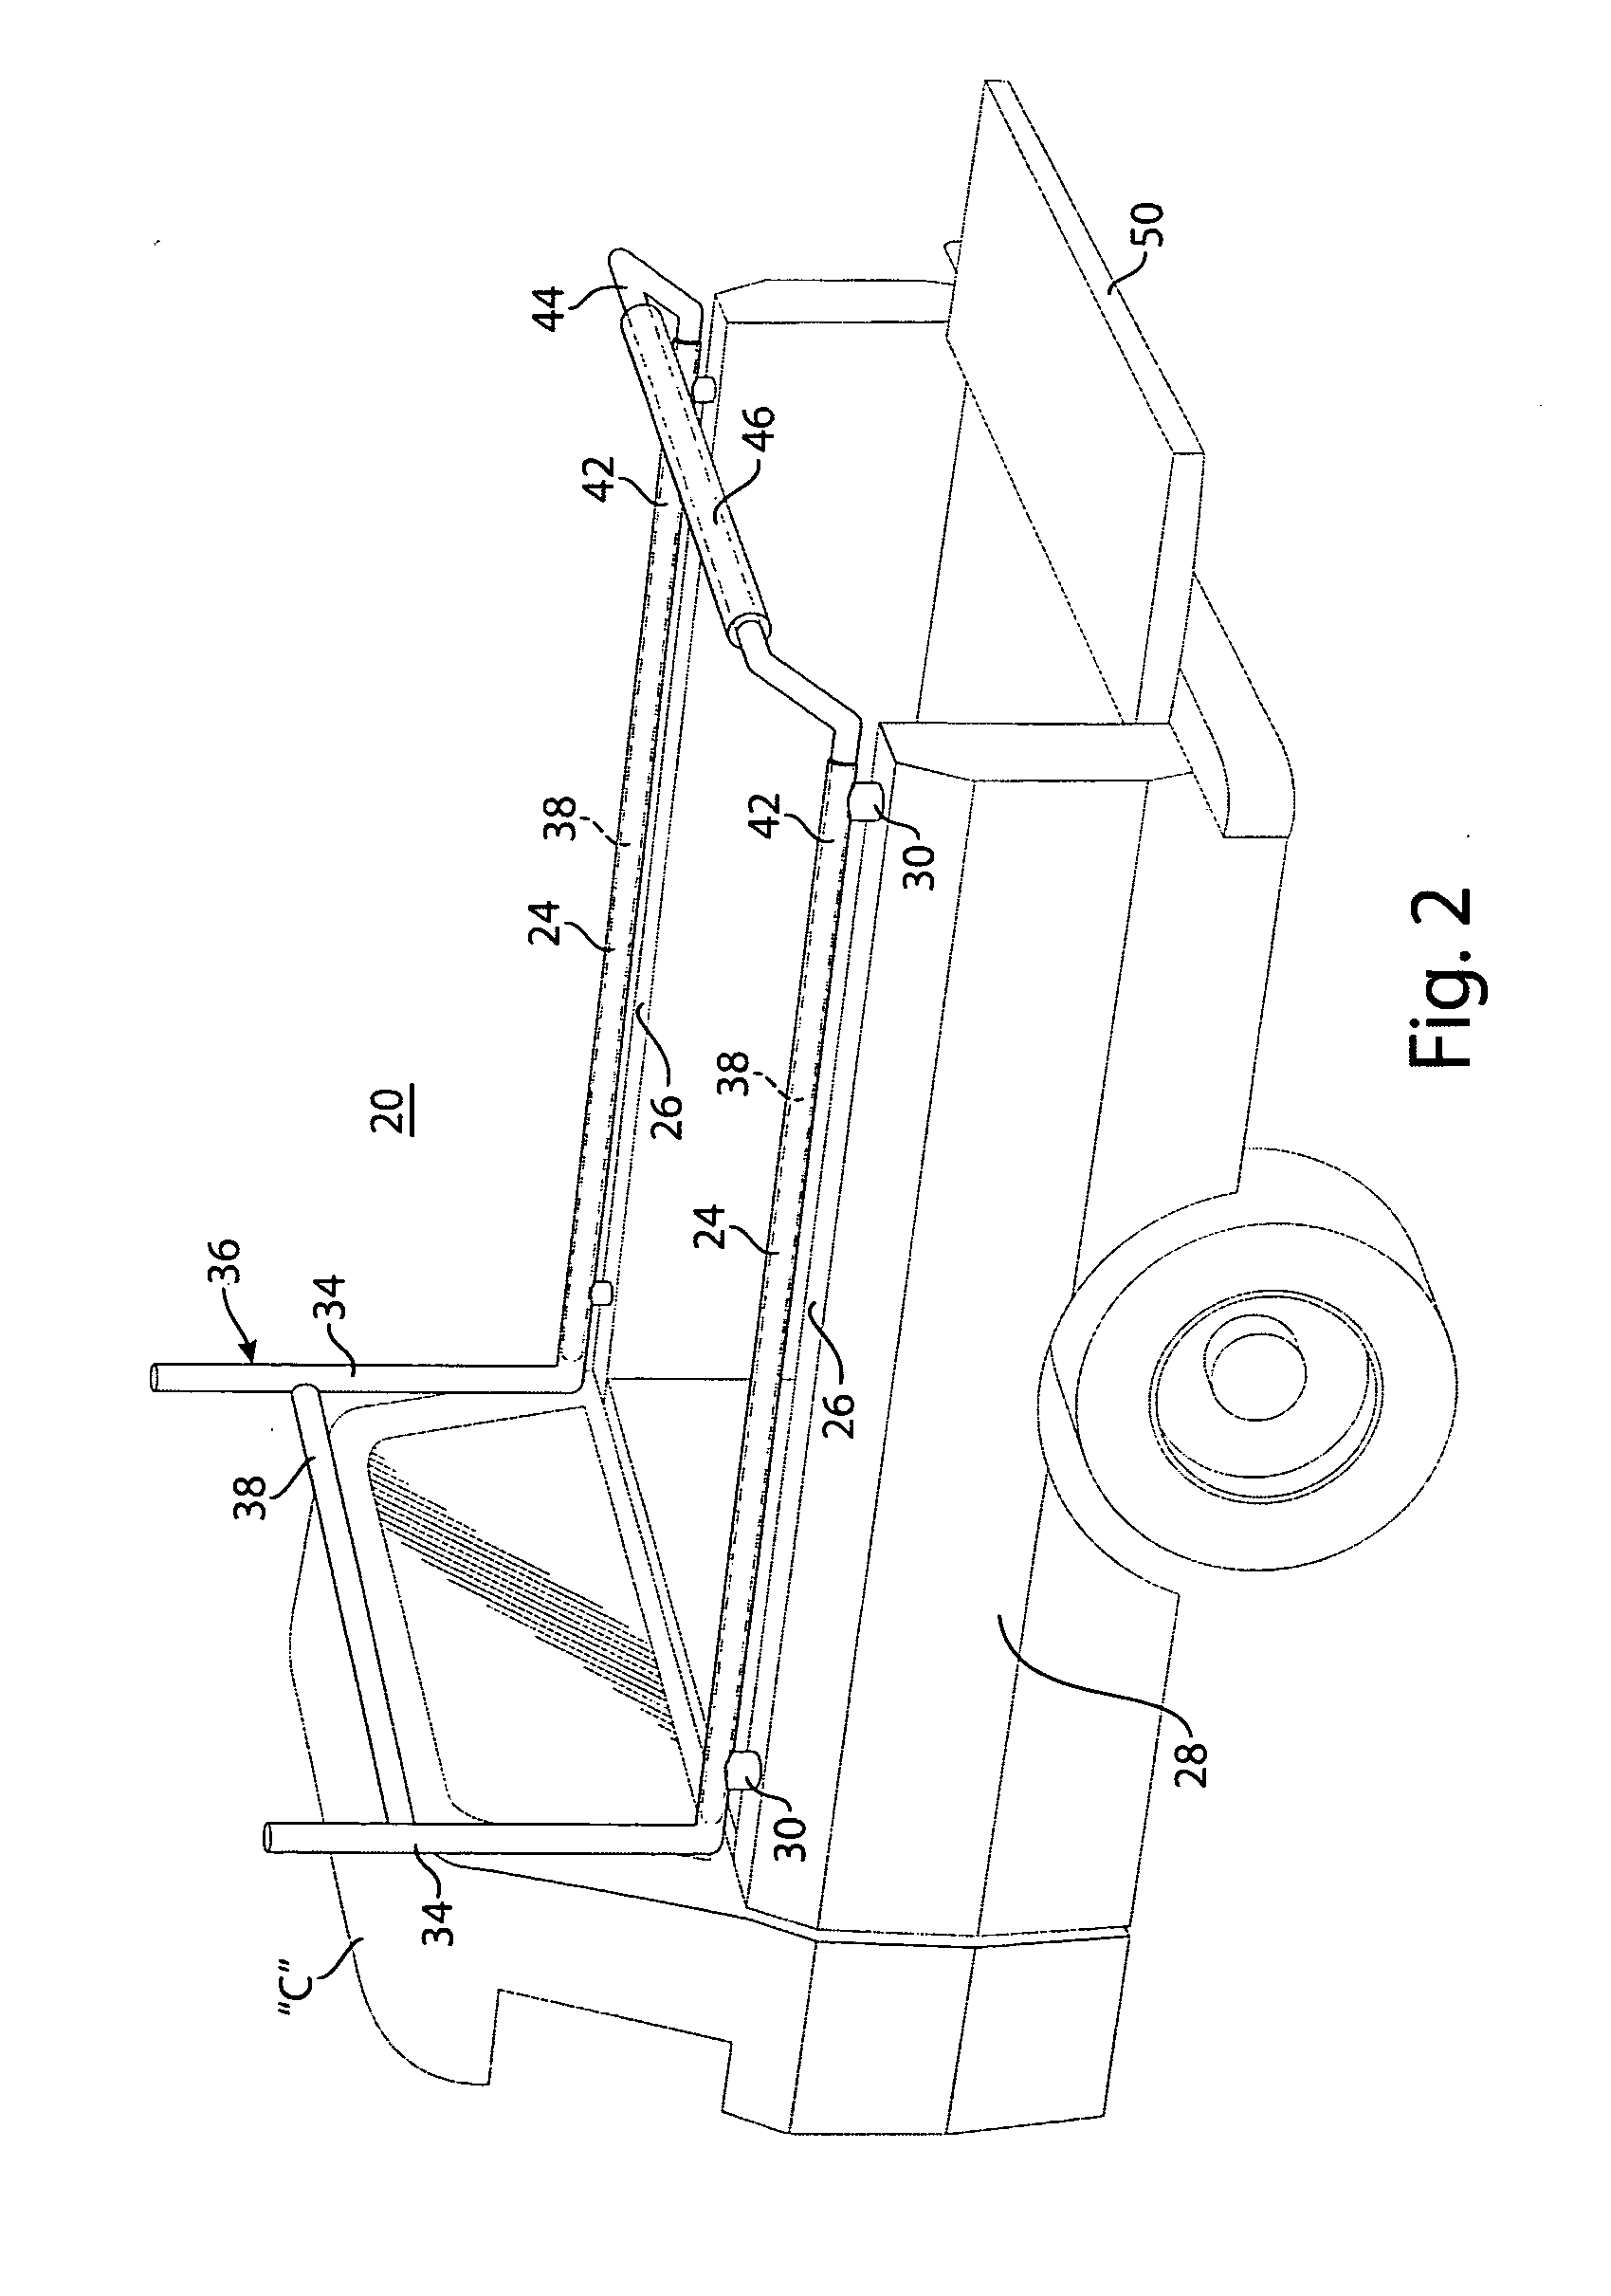 Adaptable support arrangement for a pickup truck